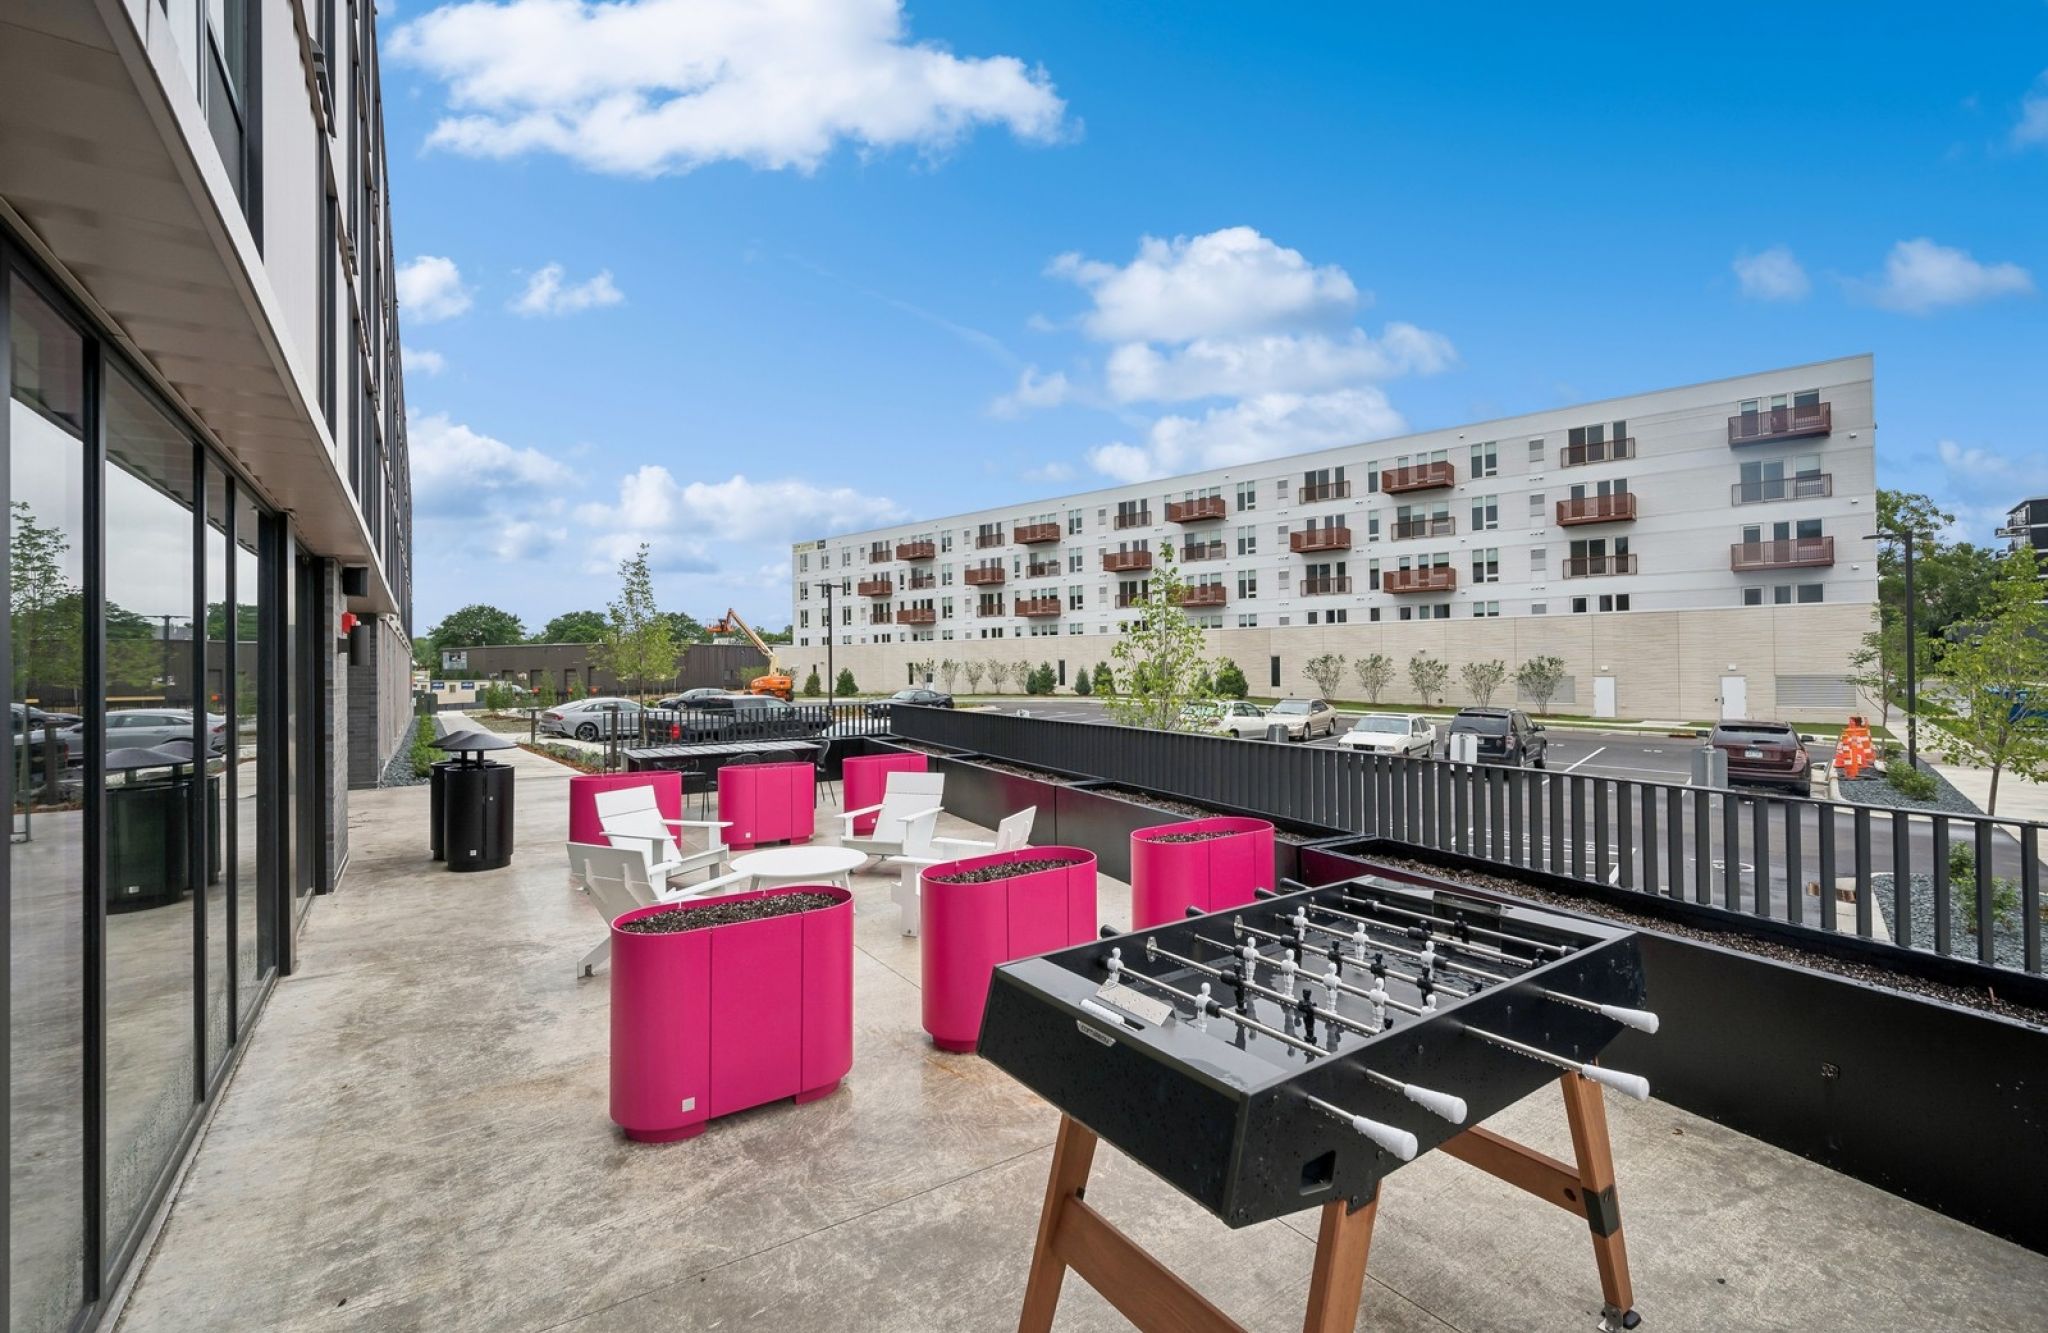 Outdoor patio at Harbourline featuring bright pink seating, a foosball table, and ample space for relaxation.